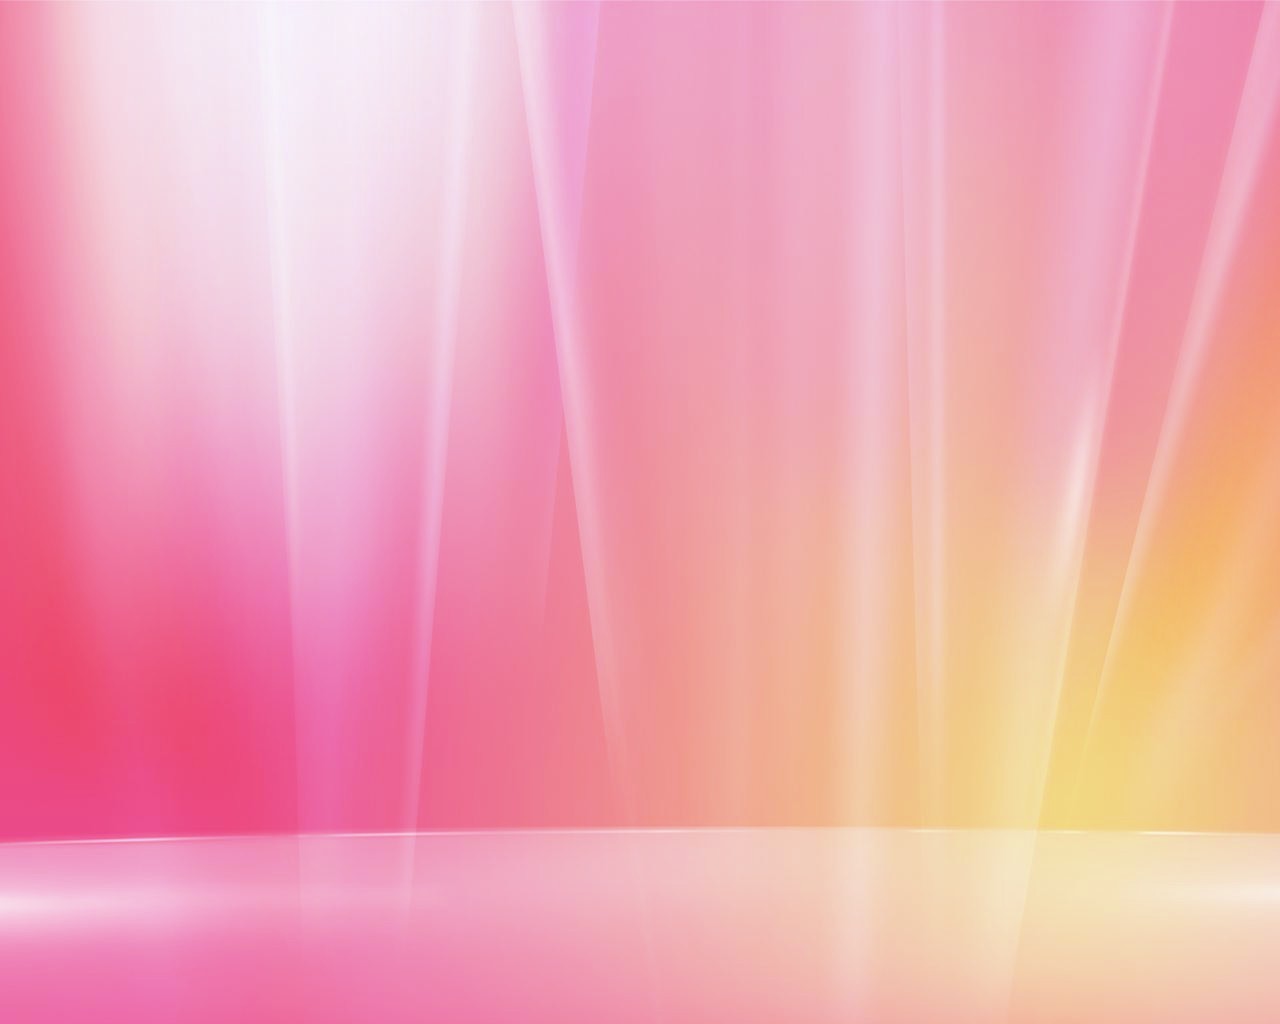  Cool Pink Wallpapers for Your Desktop